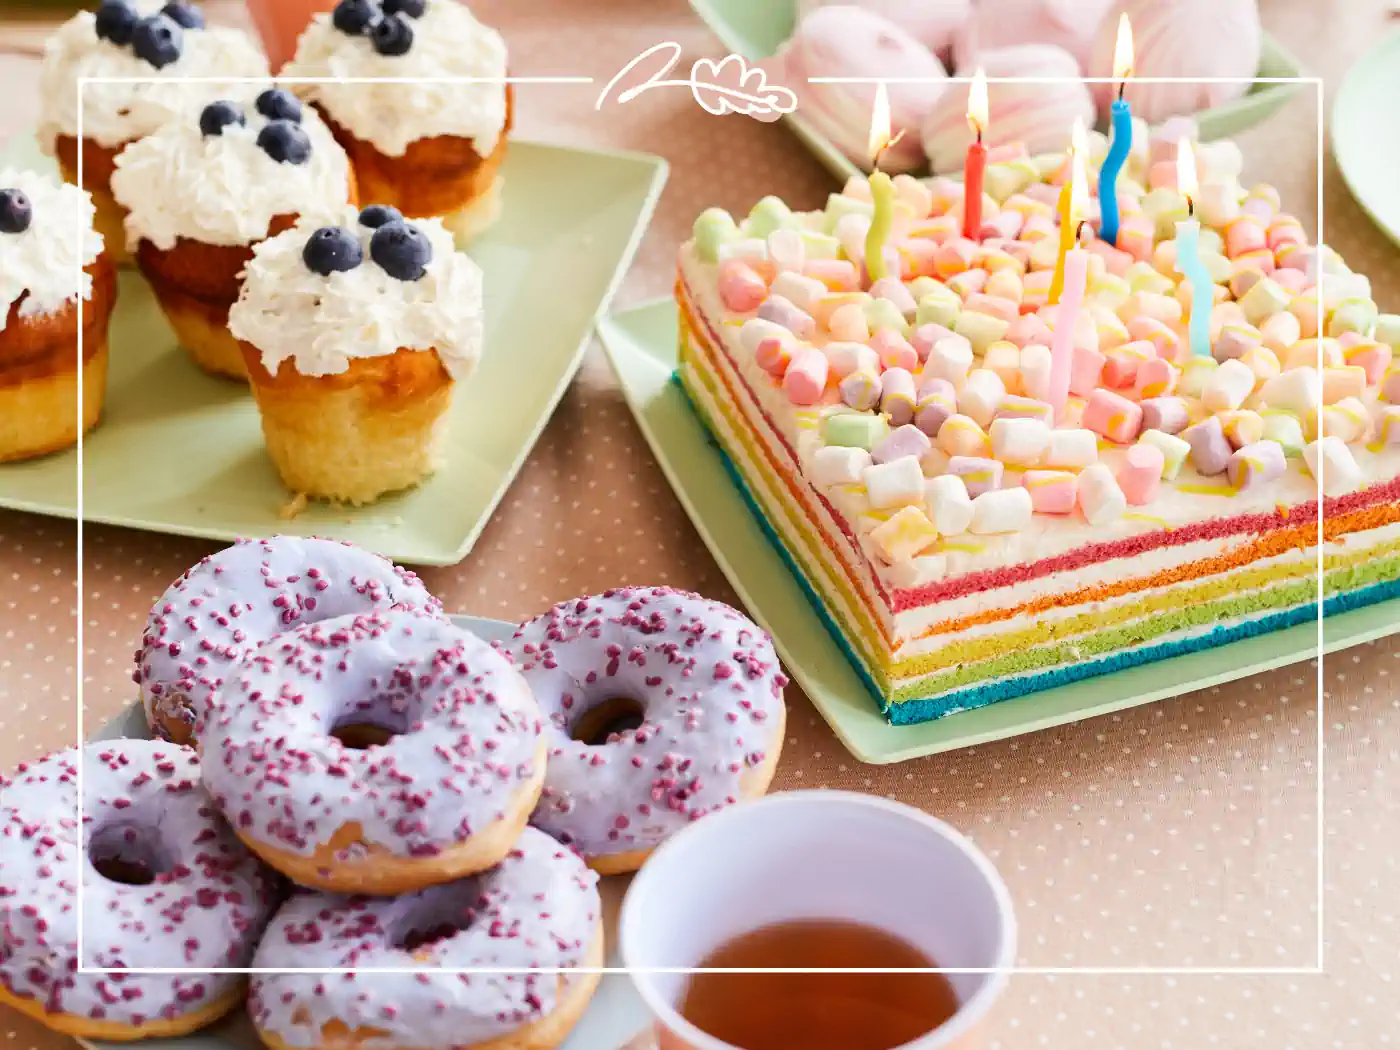 A variety of desserts including donuts, cupcakes with blueberries, and a rainbow-layered cake with candles. Fabulous Flowers and Gifts - Birthday Collection.